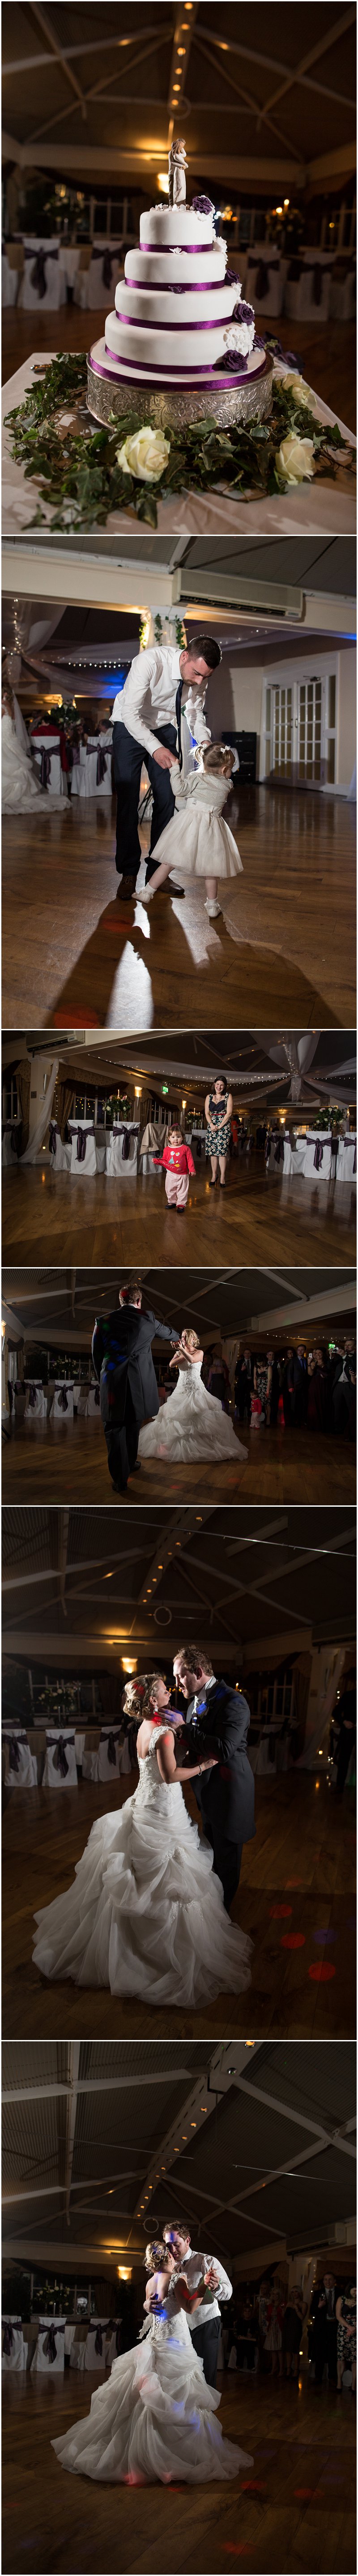 Off camera flash photographer at a wedding at The Mere Court Hotel Cheshire Wedding Photographer